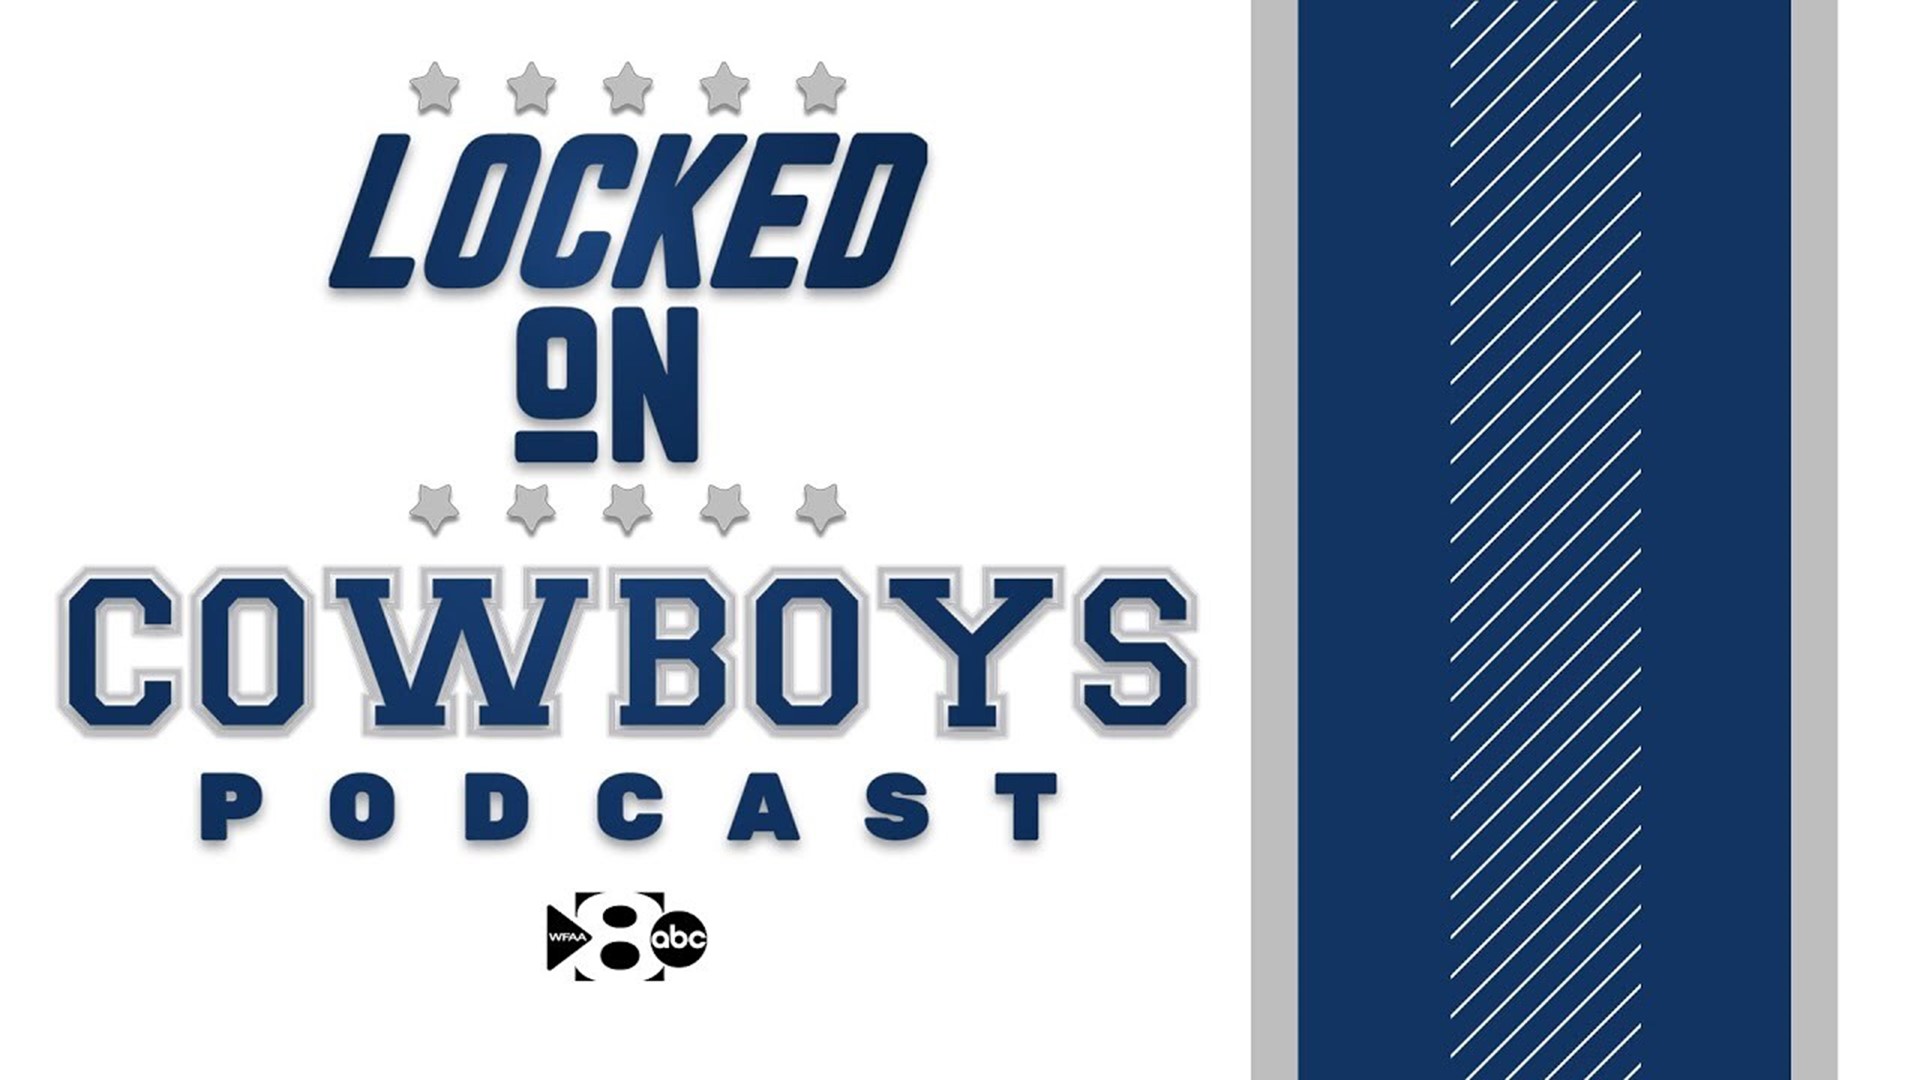 In this episode of the Locked On Cowboys Podcast, Marcus Mosher and Landon McCool discuss all of the latest player rankings from Pro Football Focus. Is Dak Prescott